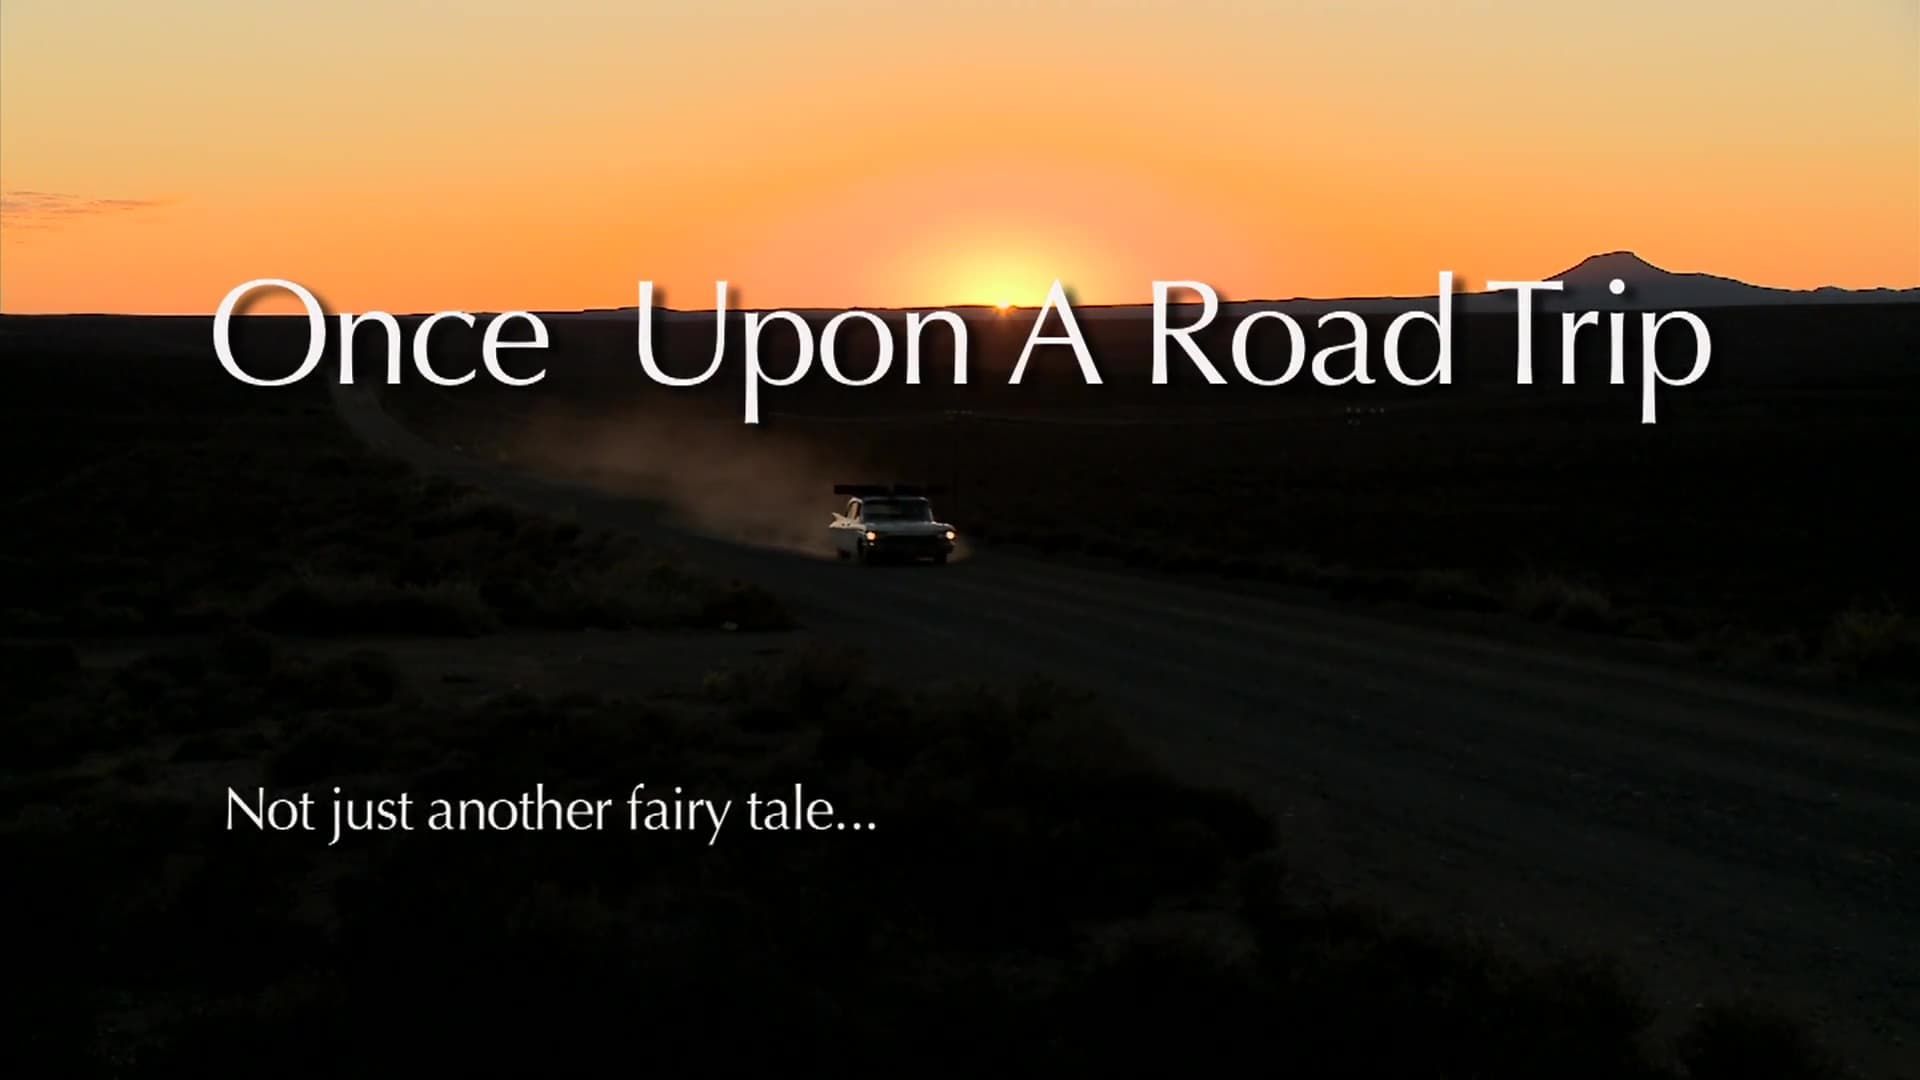 Once Upon a Road Trip background